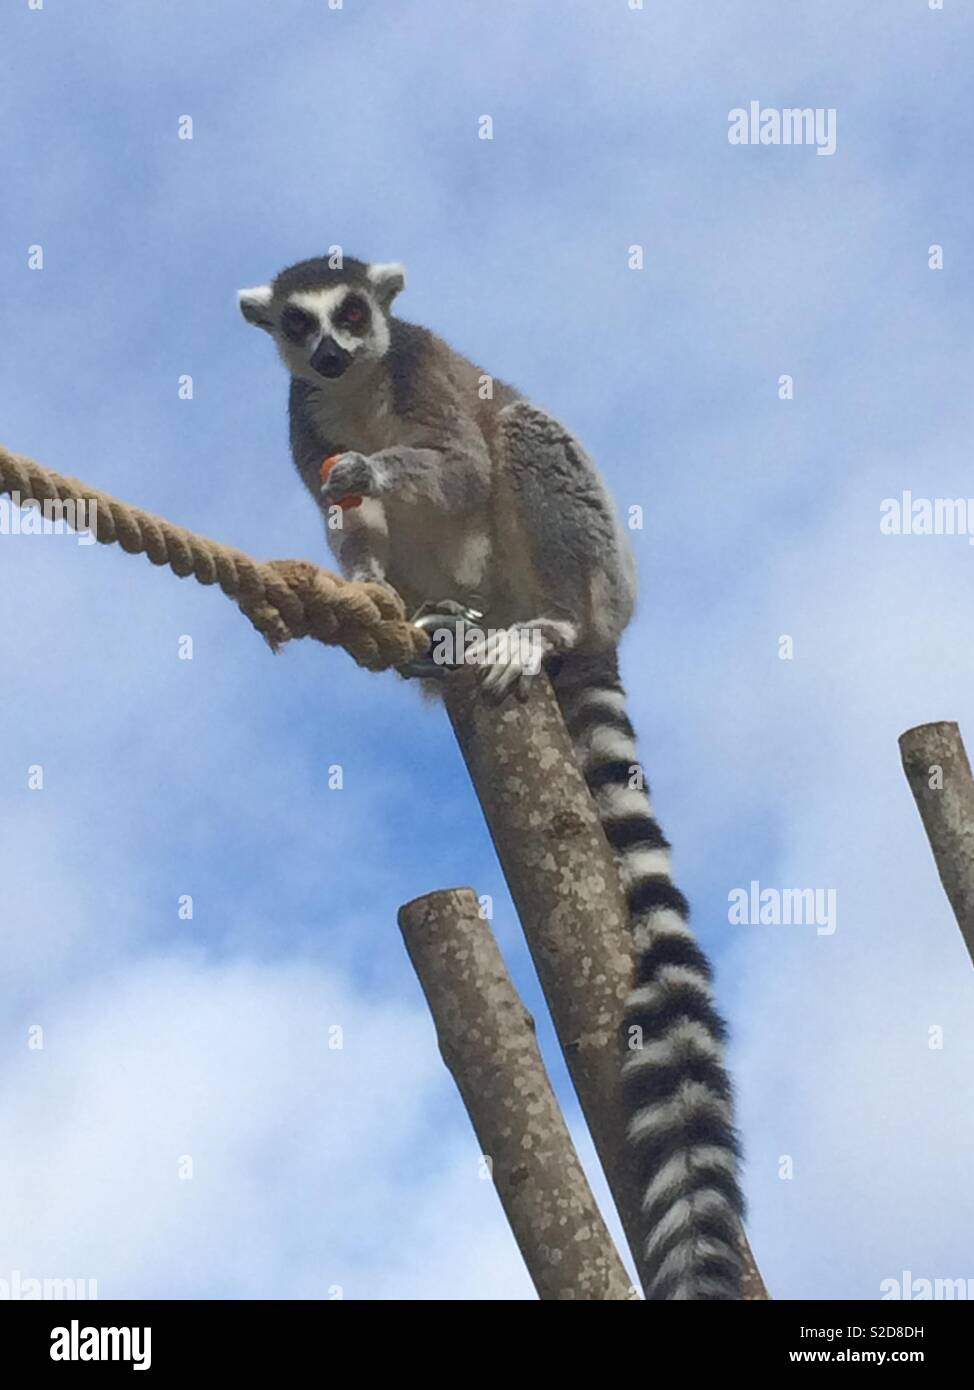 Ring tailed lemur on a pole eating Stock Photo